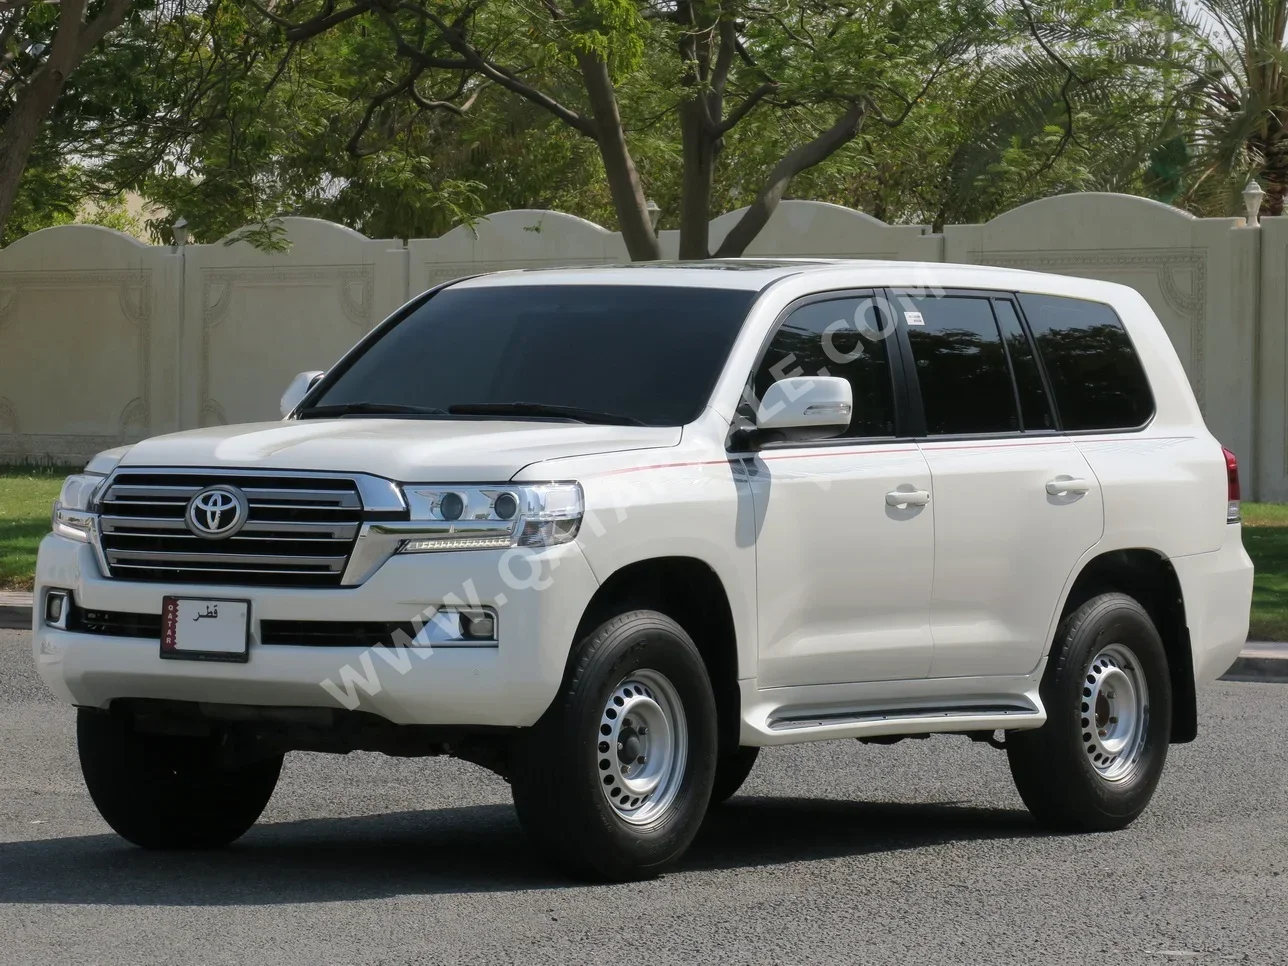  Toyota  Land Cruiser  GXR  2016  Manual  120,000 Km  6 Cylinder  Four Wheel Drive (4WD)  SUV  White  With Warranty